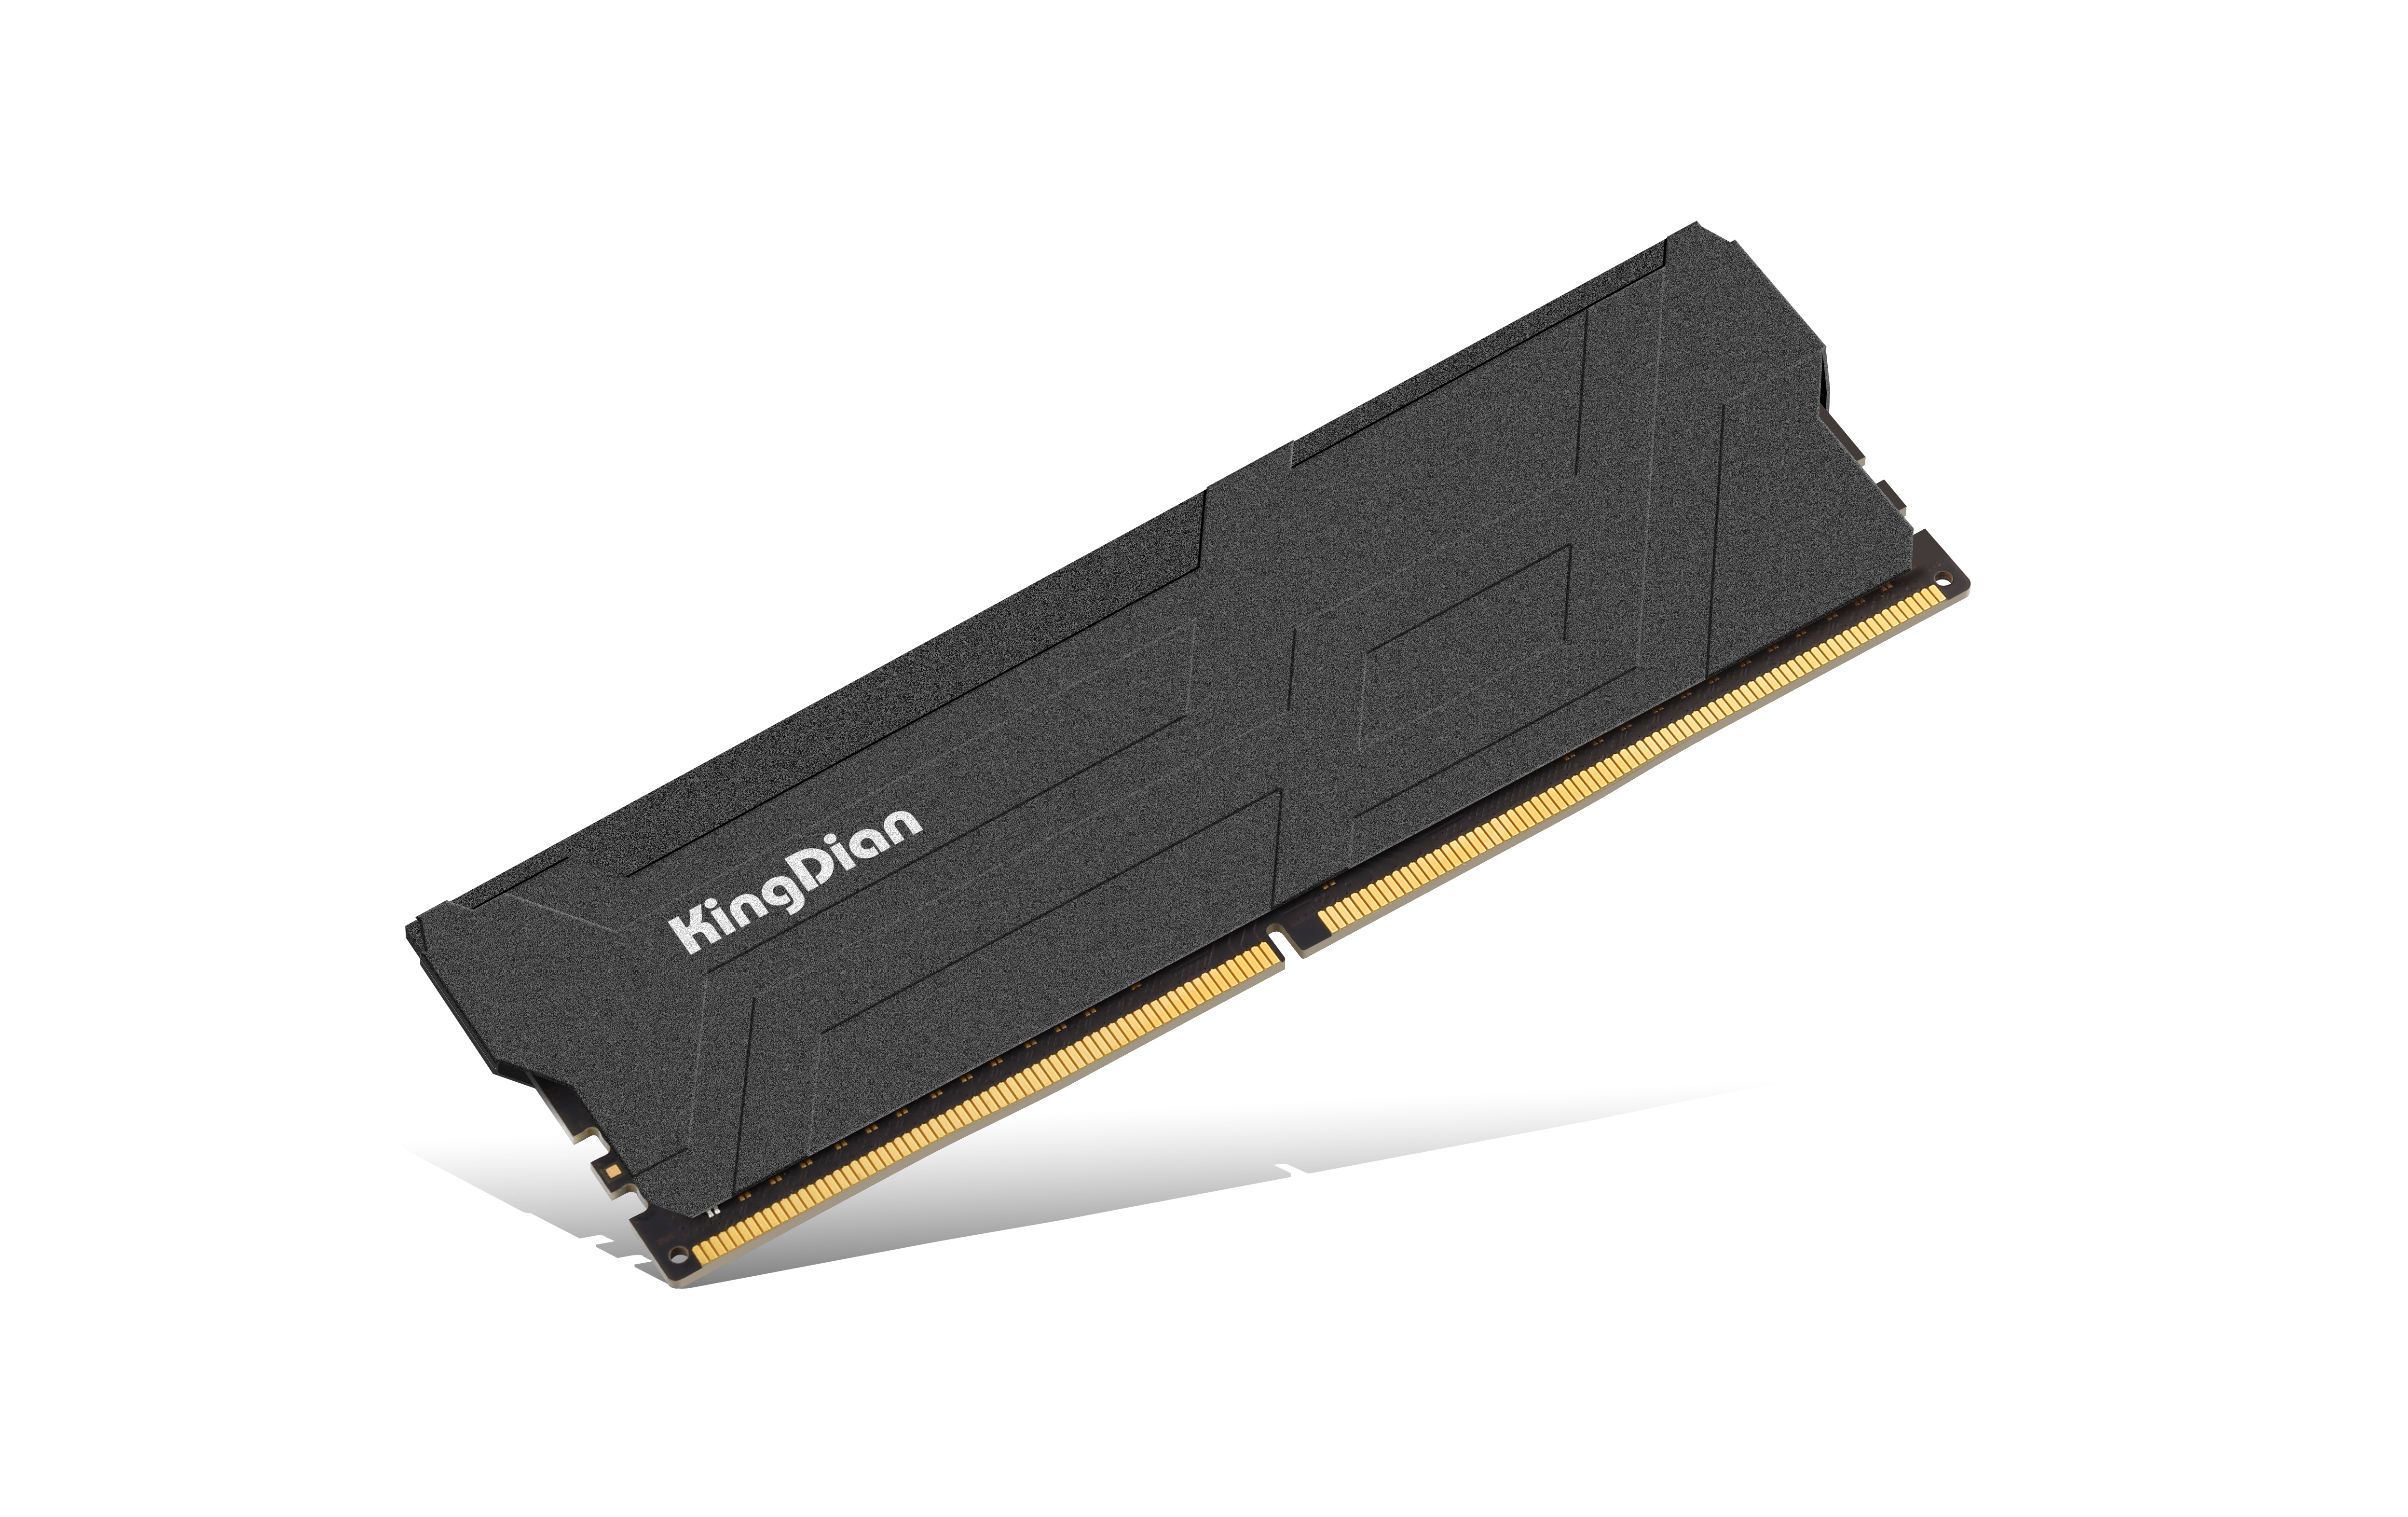 Enhance your system's performance with DDR4 UDIMM Heatsink Series H42,KingDian.